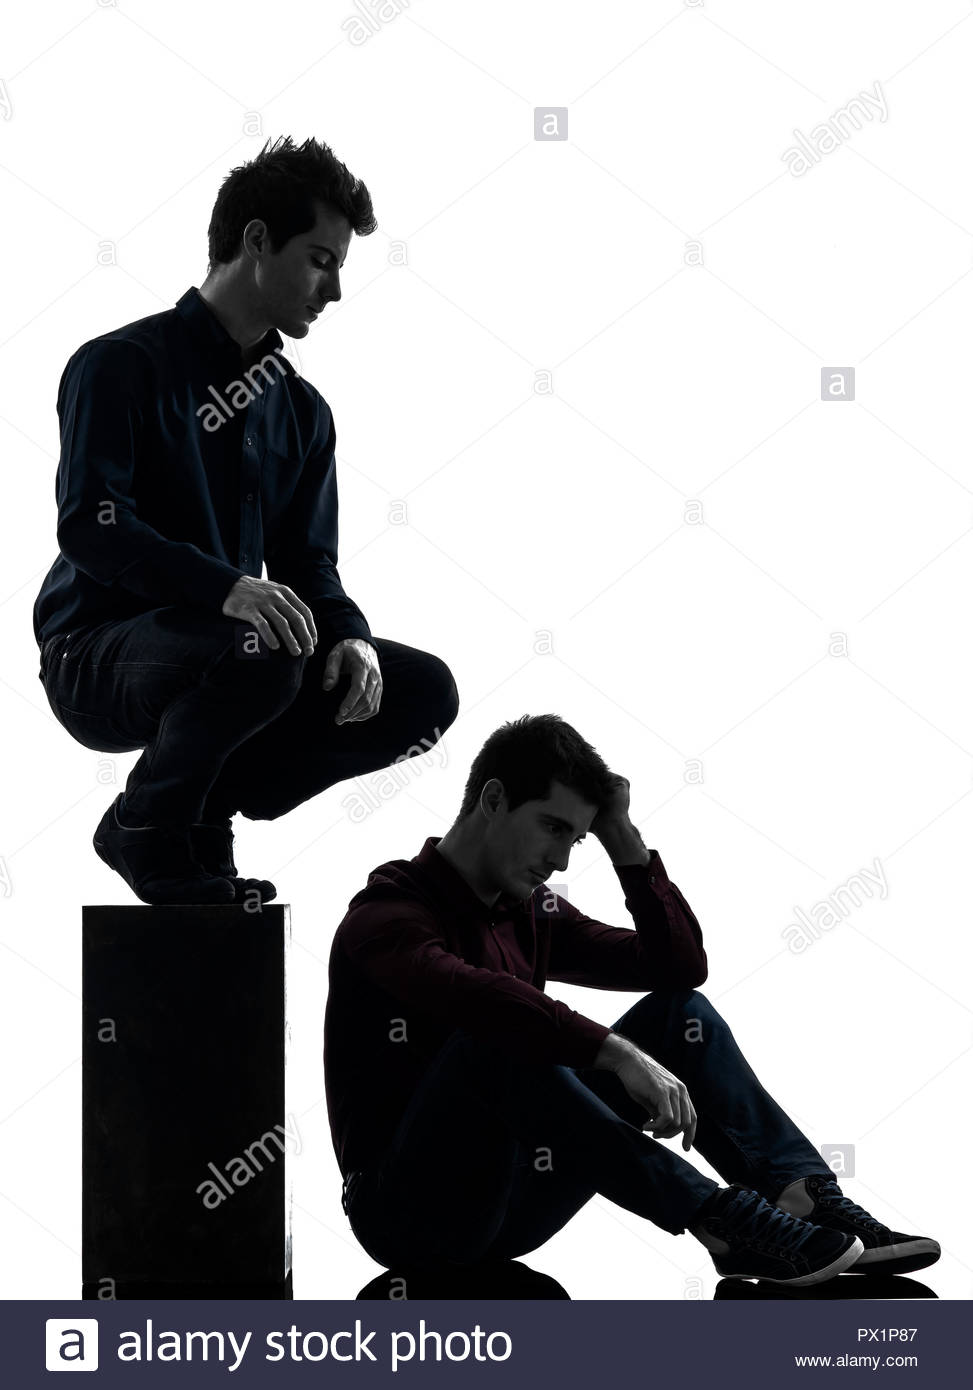 Two Young Men Domination Concept Shadow White Background Stock